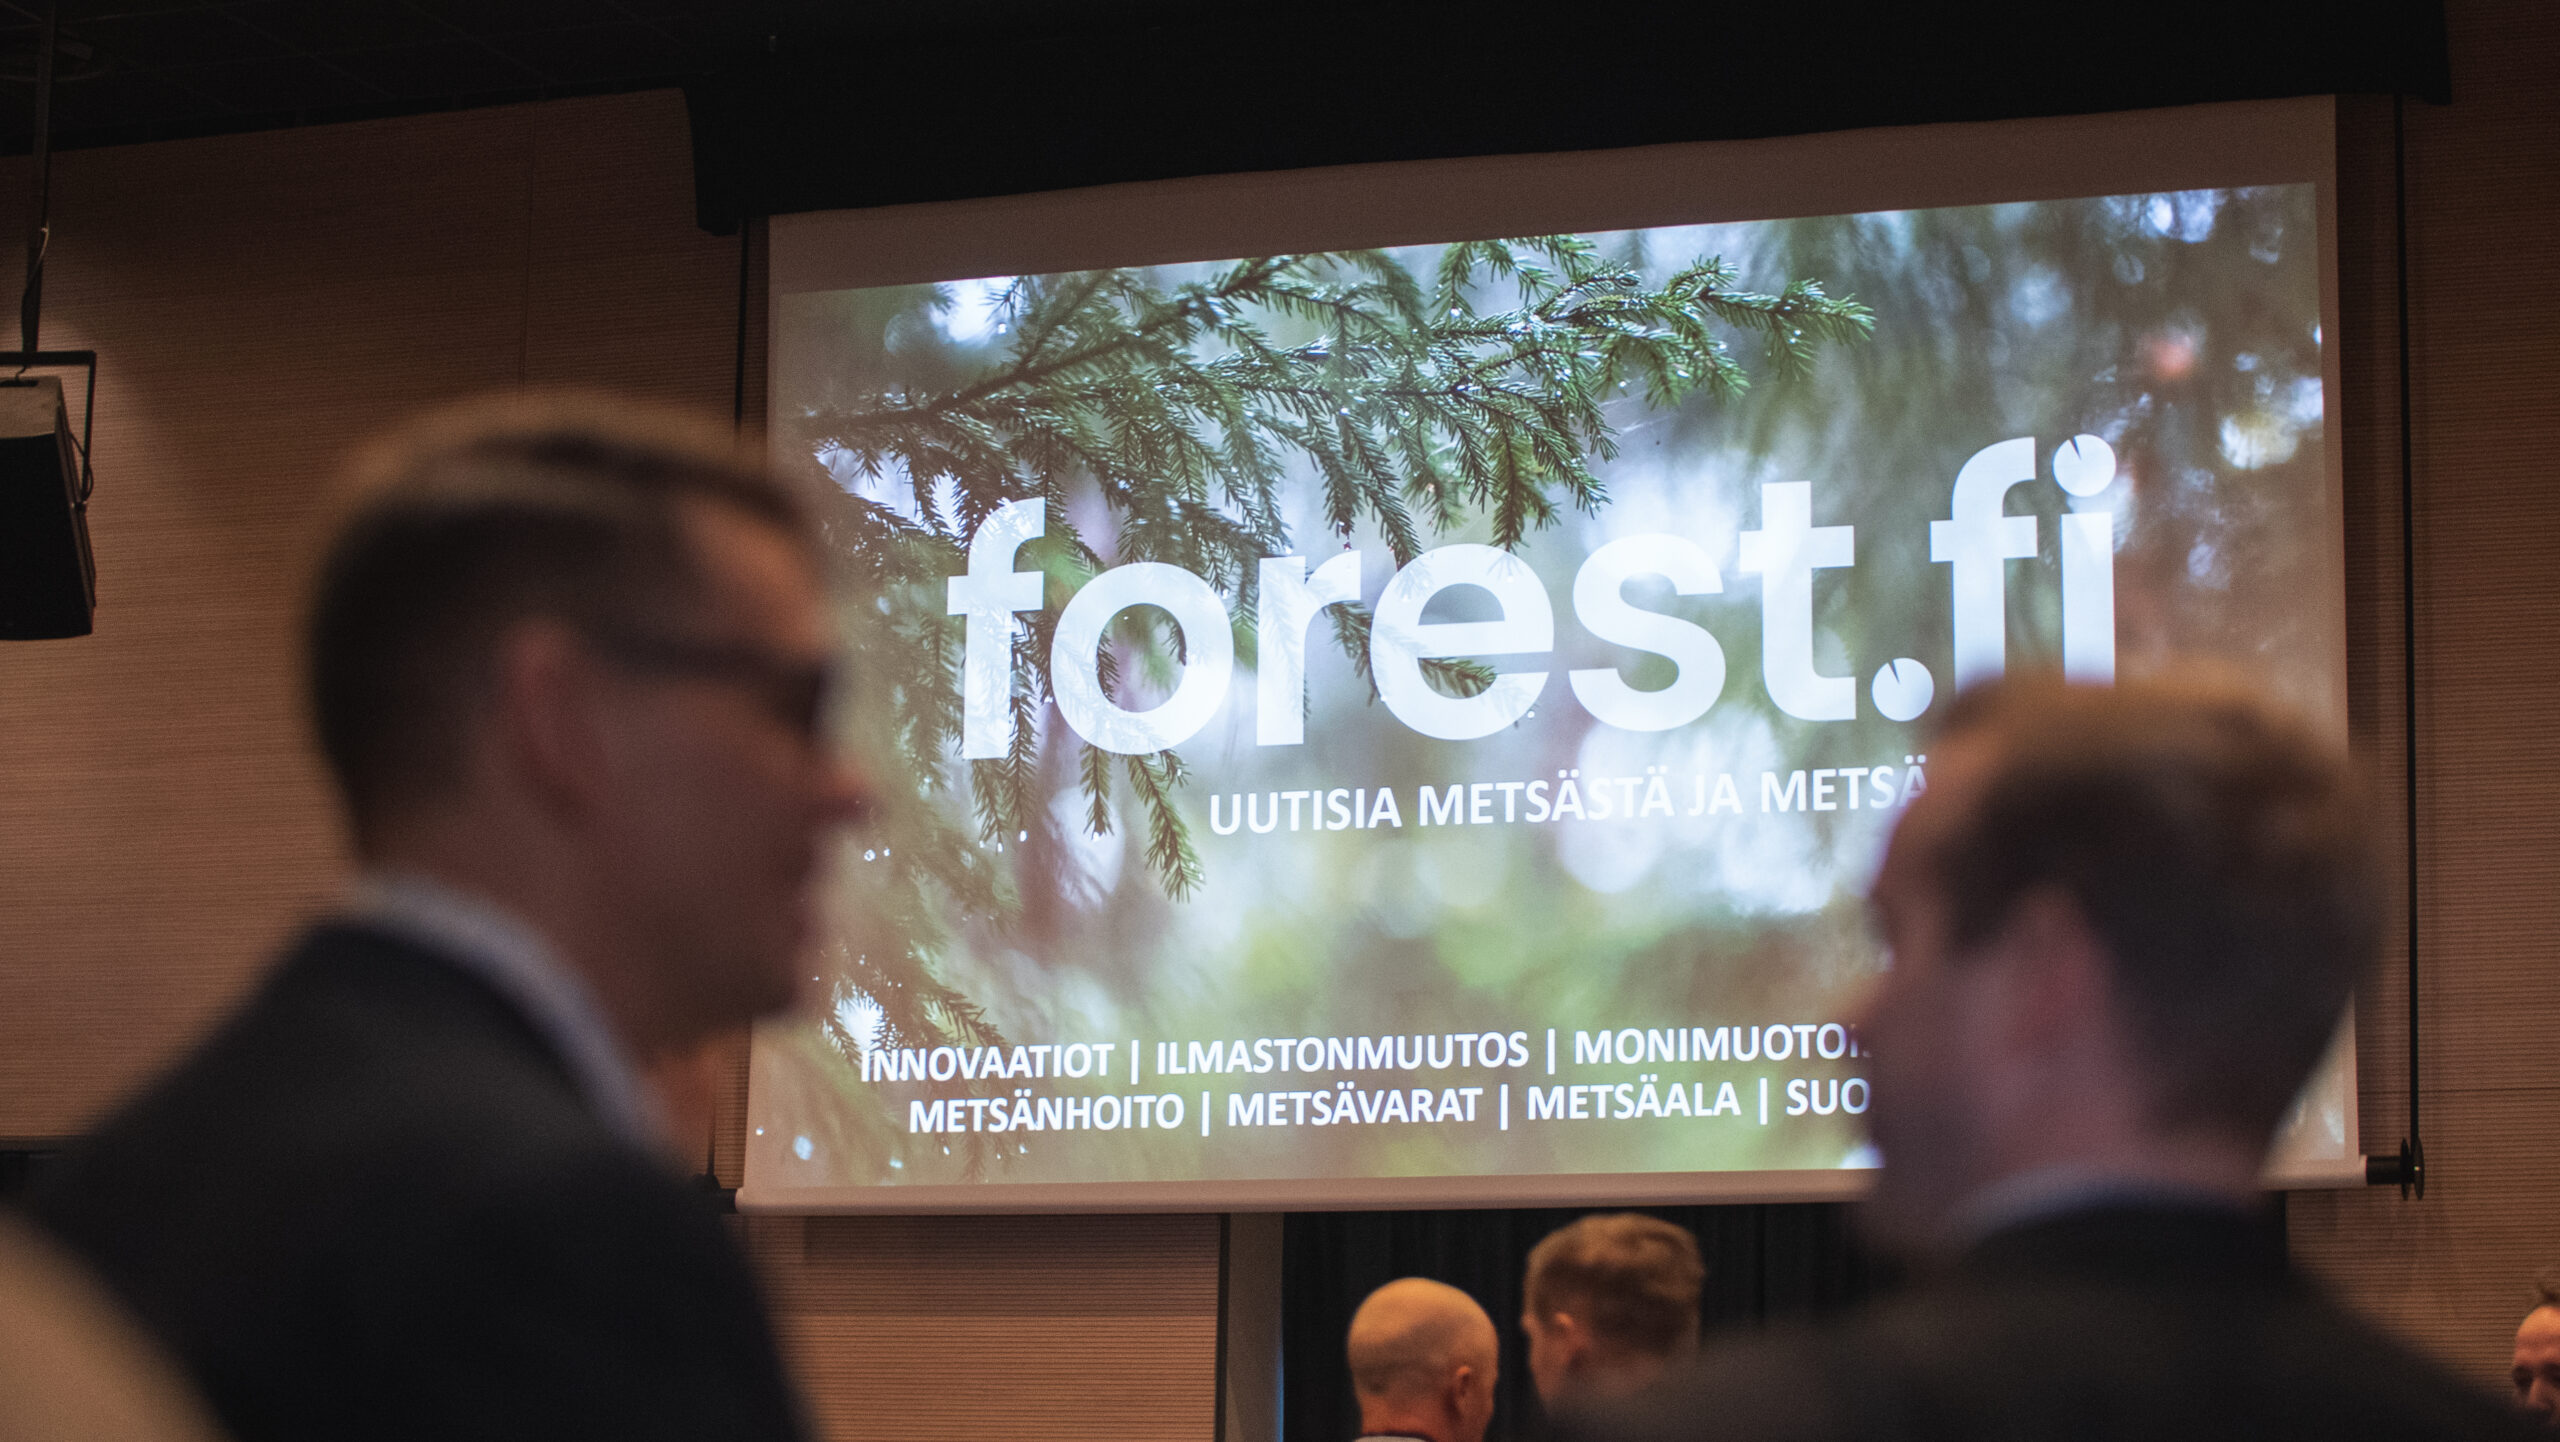 forest.fi